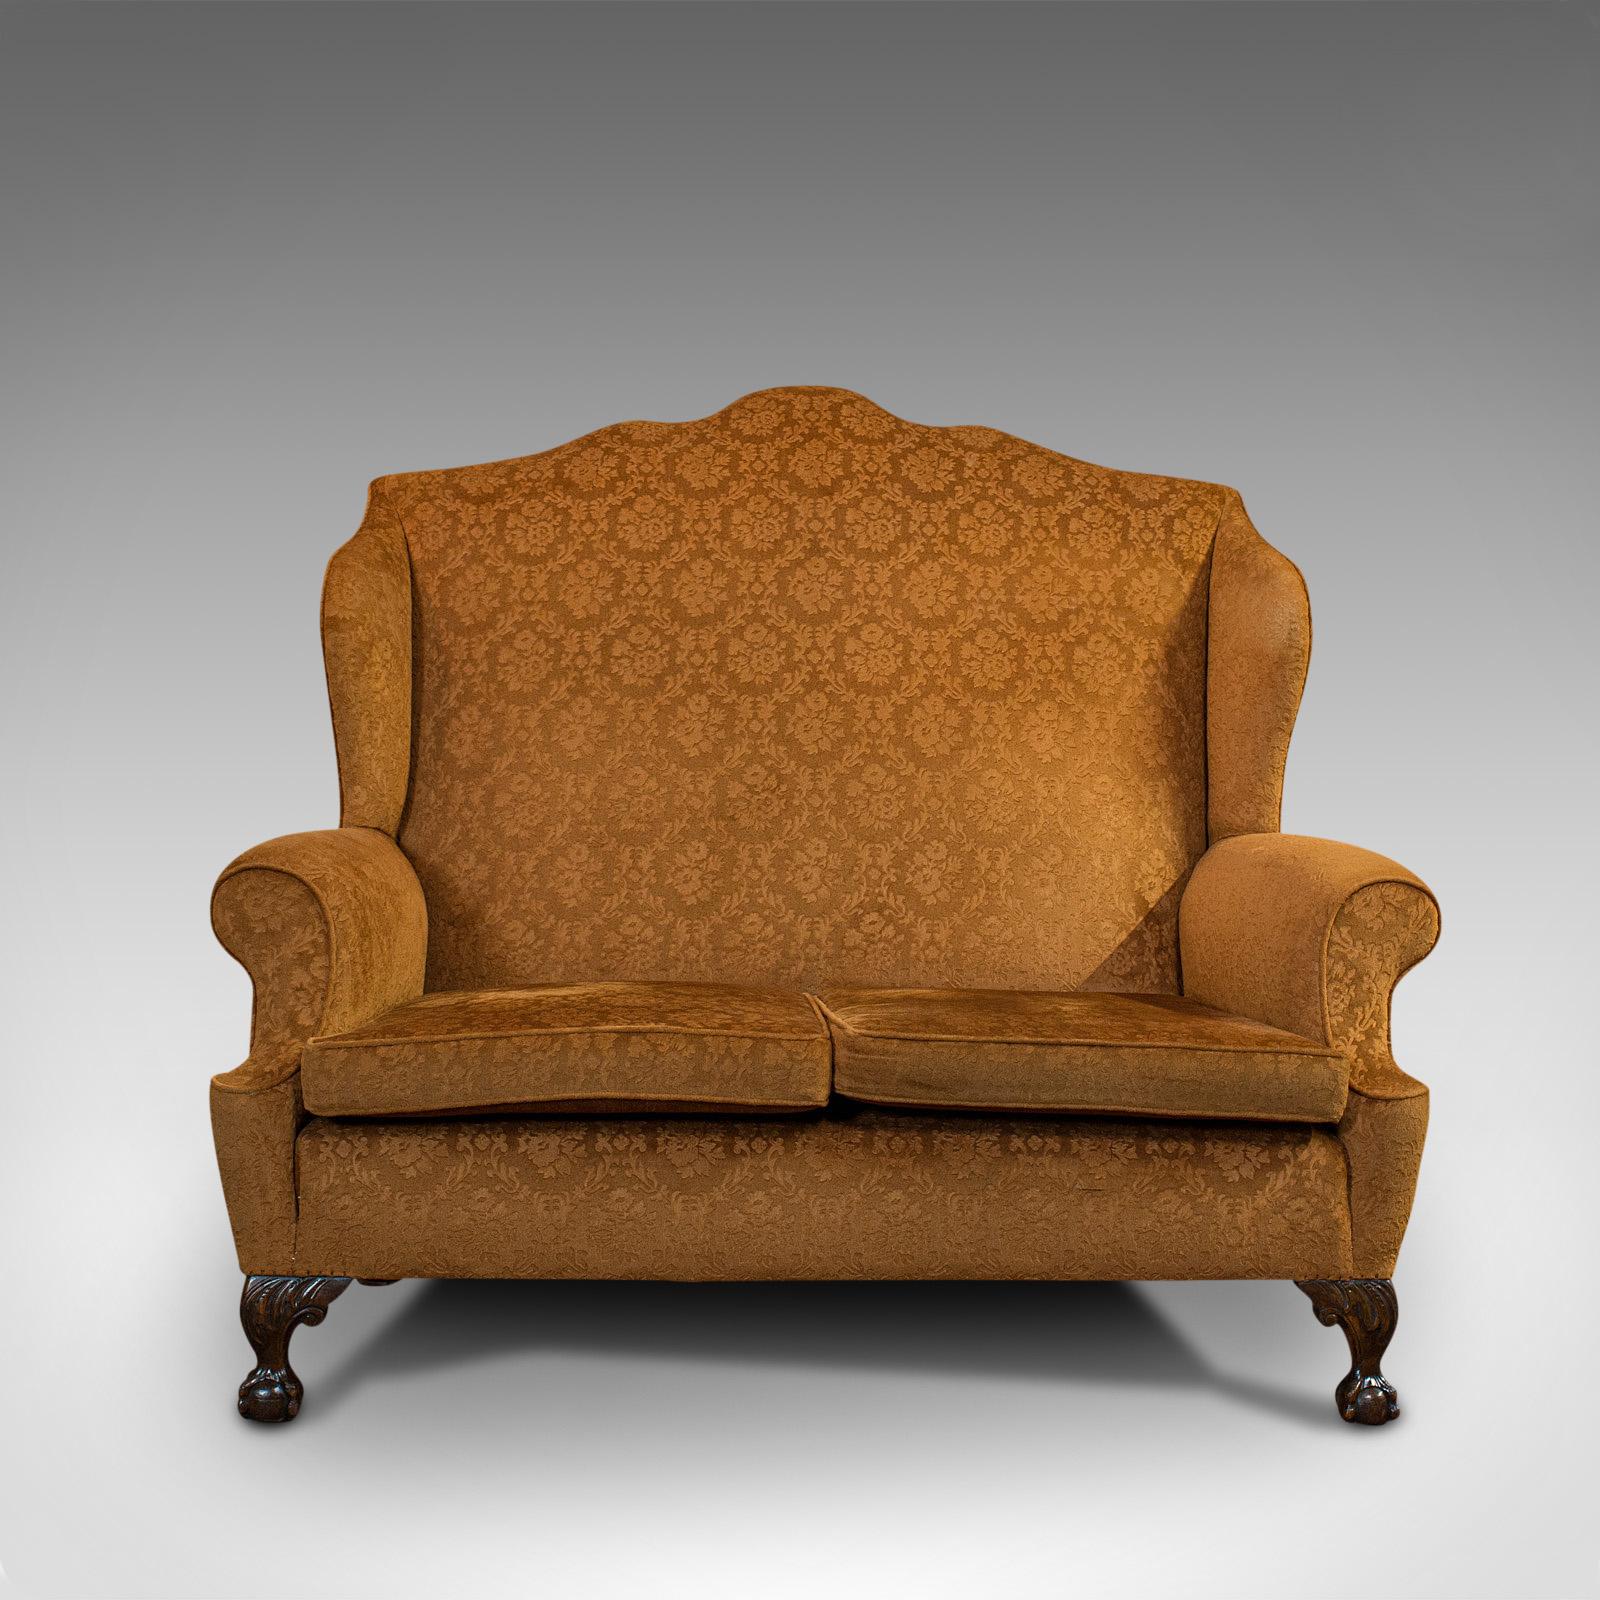 This is an antique Queen Anne style sofa. An English, upholstery and mahogany two seat settee, dating to the Victorian period, circa 1880.

Rich yellow hues and superb patterned upholstery
Displays a desirable aged patina
Traditionally stuffed,